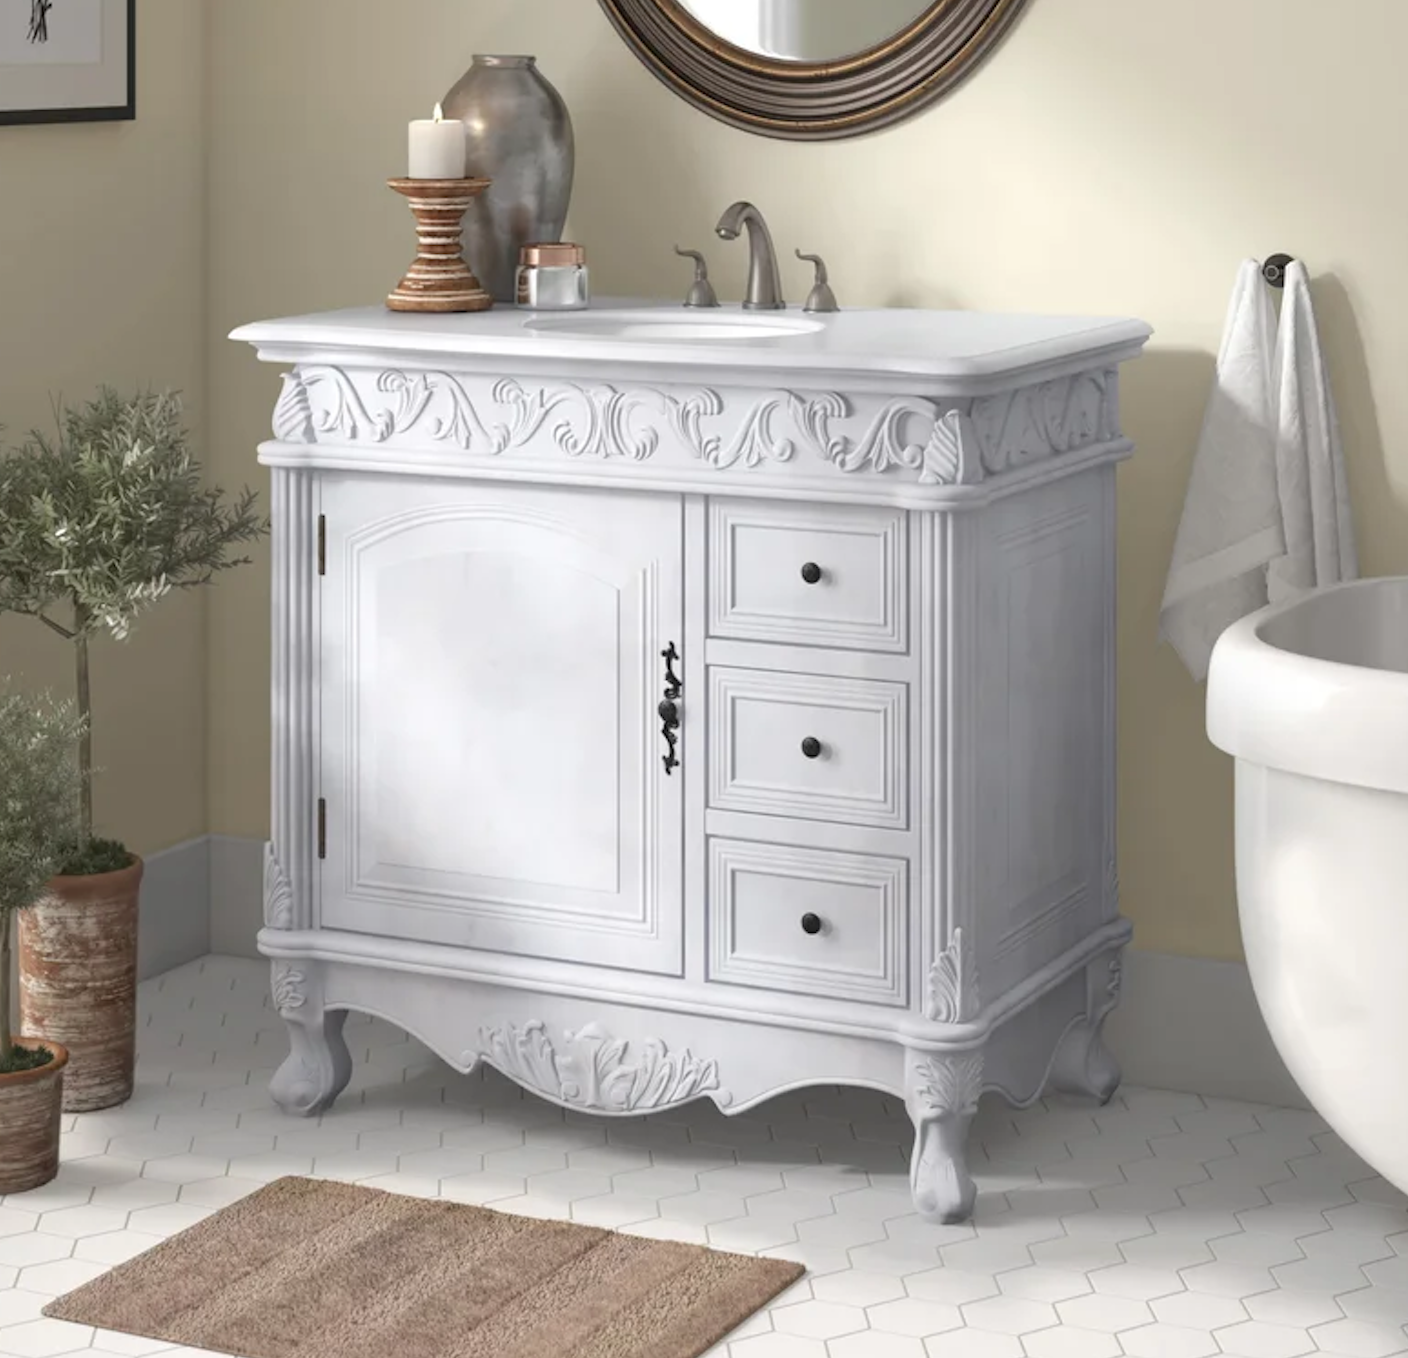 36" Antique White with Matching Medicine Cabinet, with 2 Marble Top options, and Linen Cabinet Option